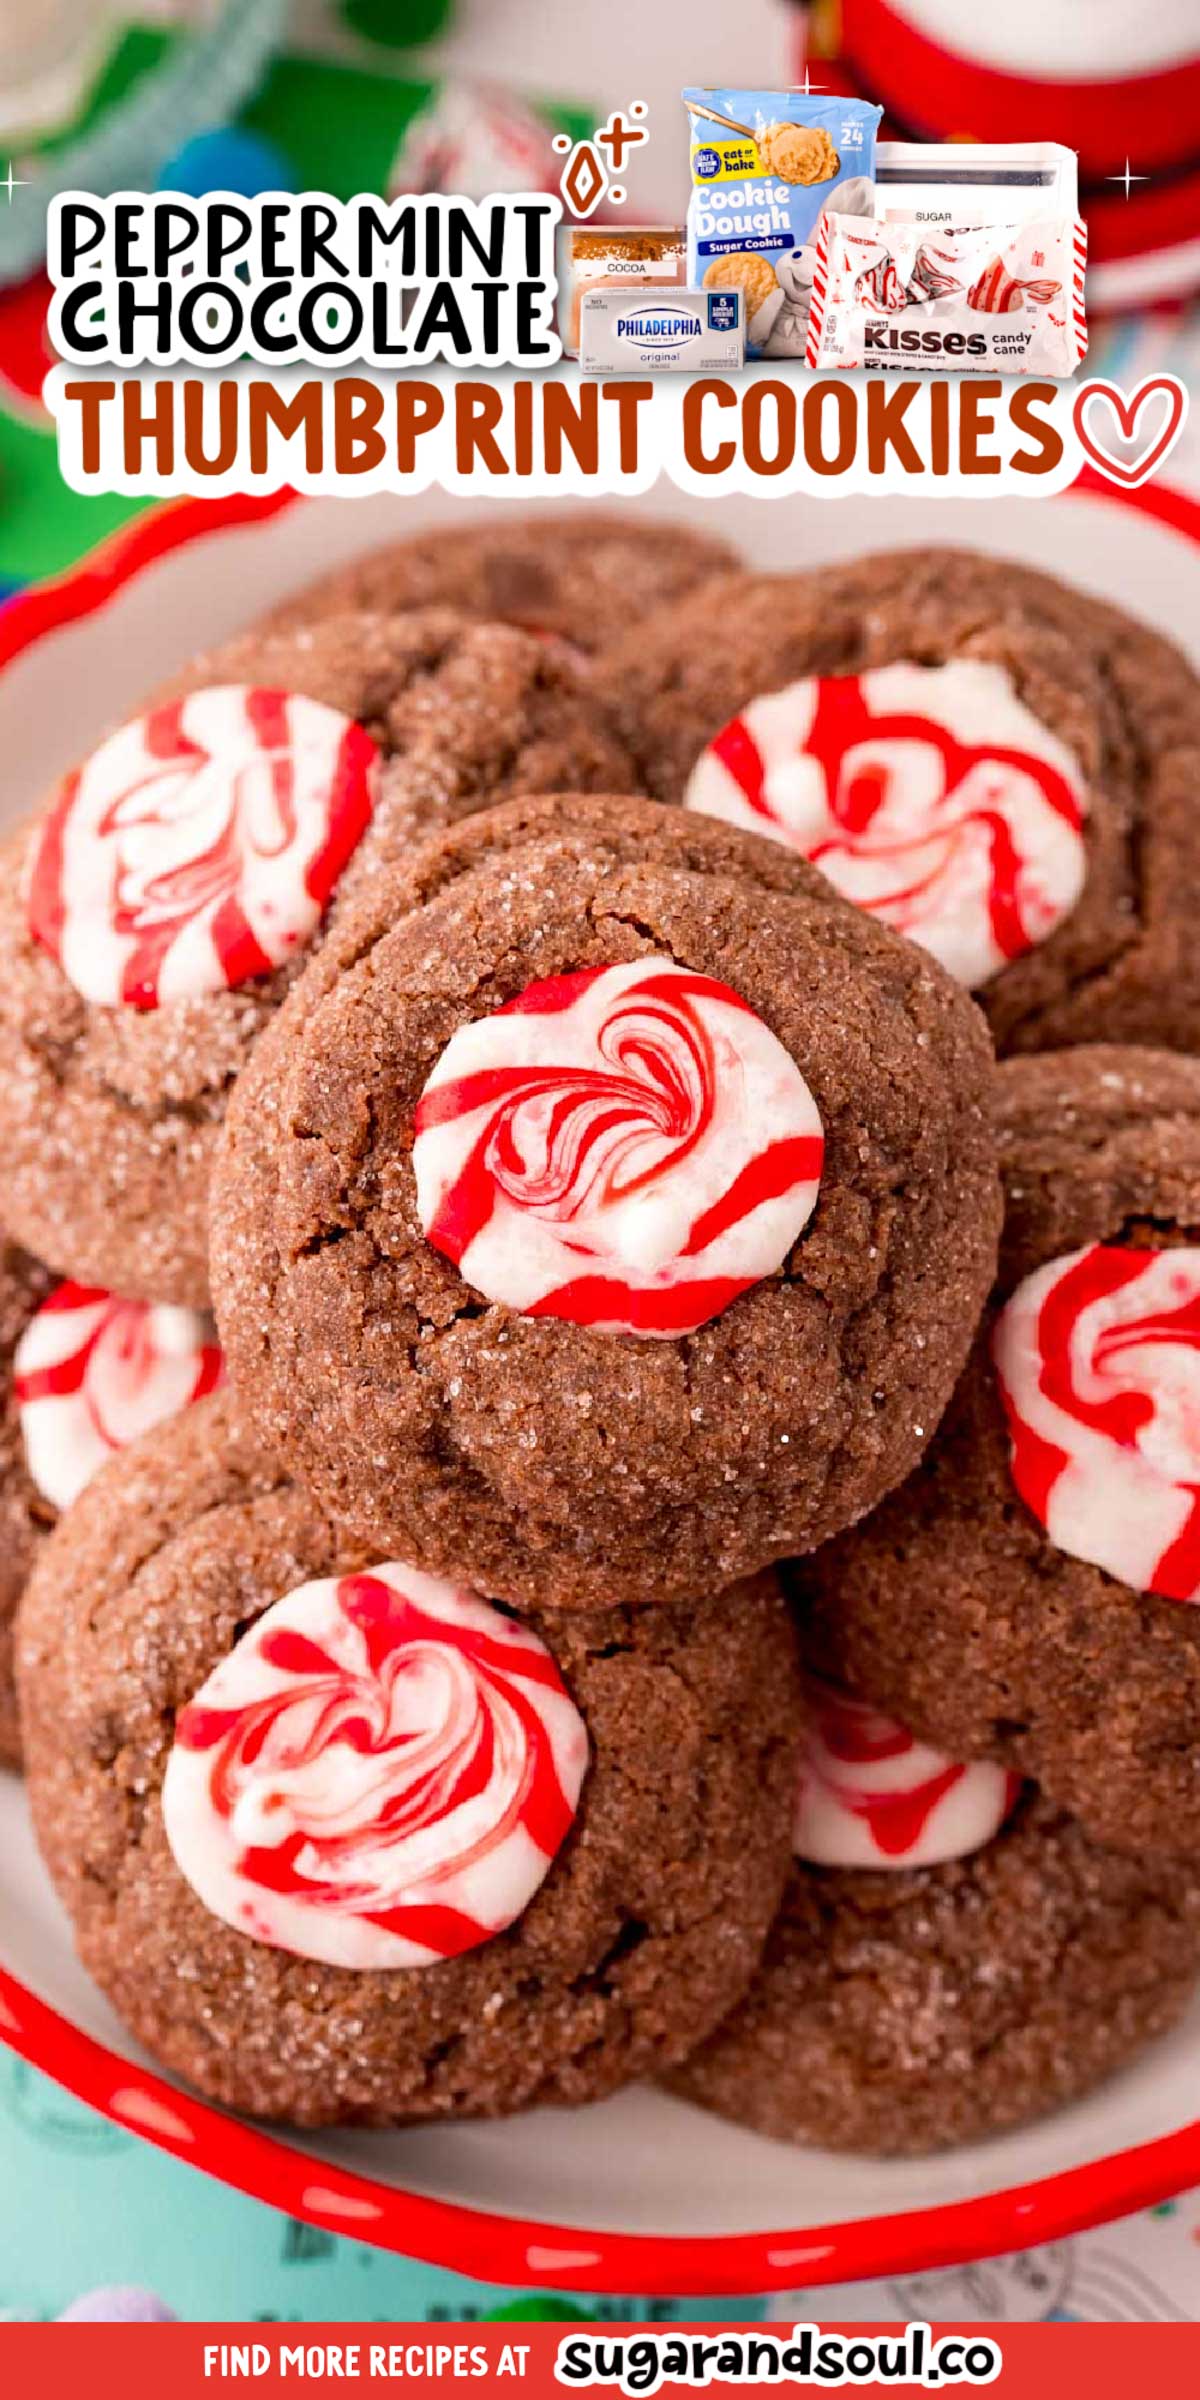 Chocolate Peppermint Thumbprint Cookies are a soft and chewy treat that's made with refrigerated cookie dough and Hershey's Peppermint Kisses! An easy-to-make sweet treat that's ready in under 35 minutes! via @sugarandsoulco